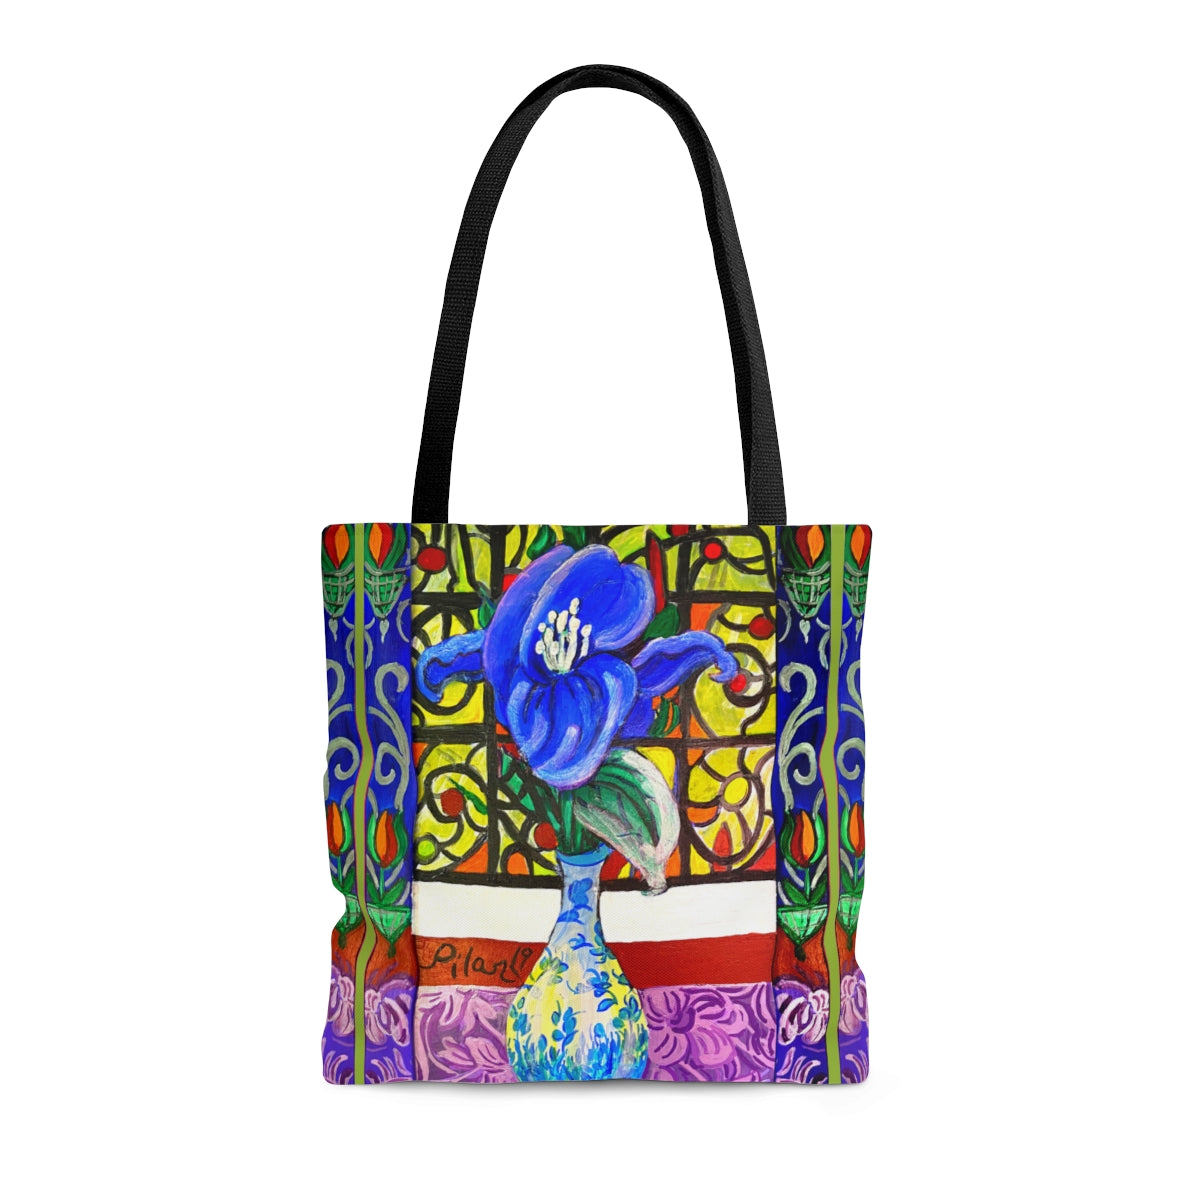 Tote Bag - Blue Magnolia and Stained Glass